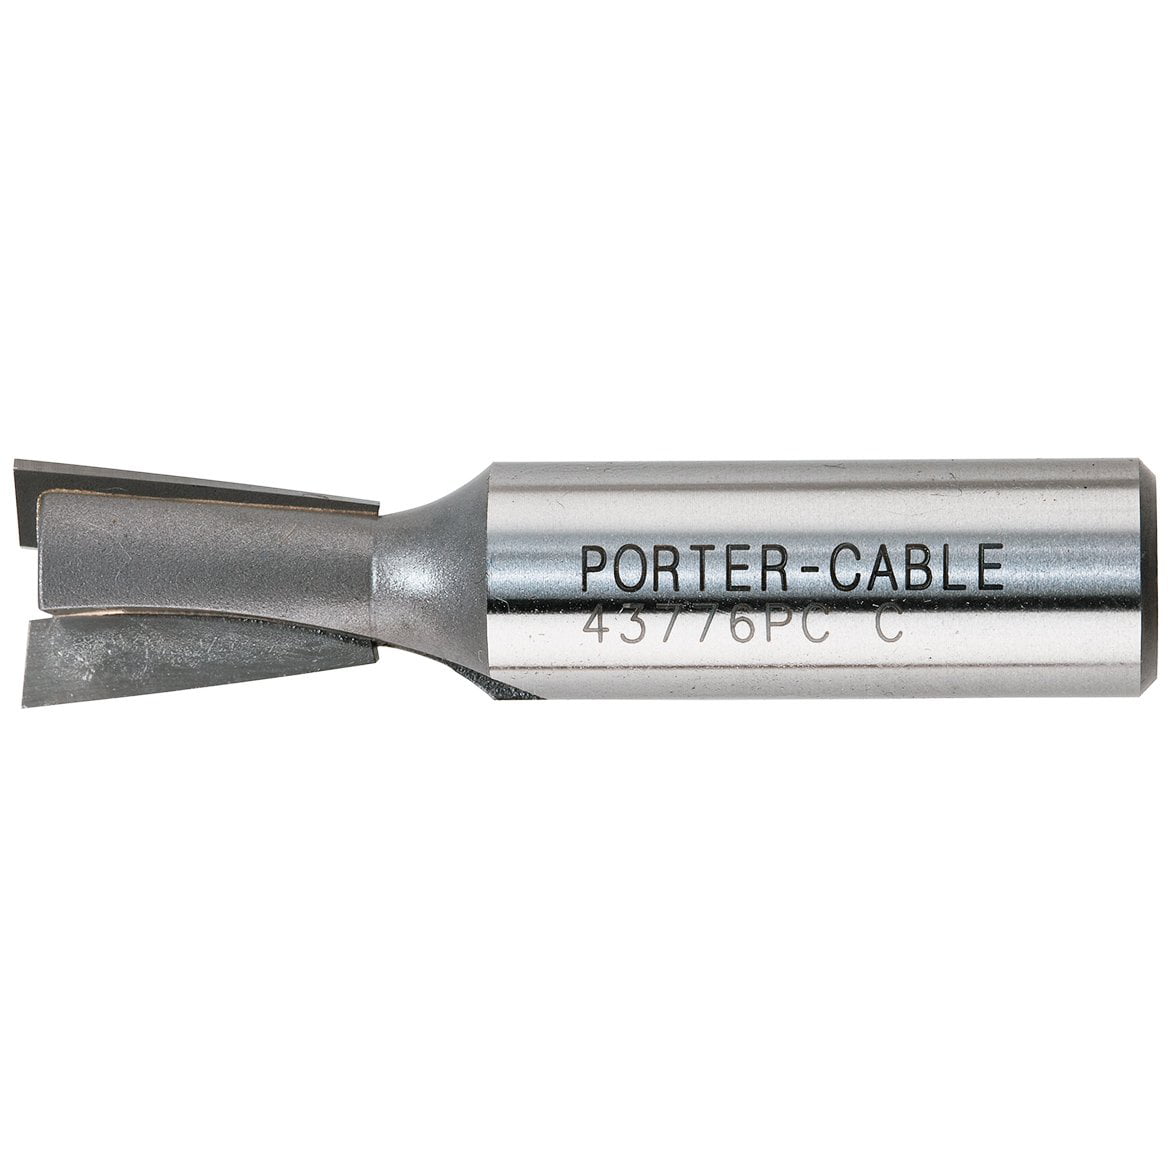 Details about   NEW PORTER CABLE 43504 1-7/8" REVERSIBLE GLUE JOINING ROUTER BITS 43504 